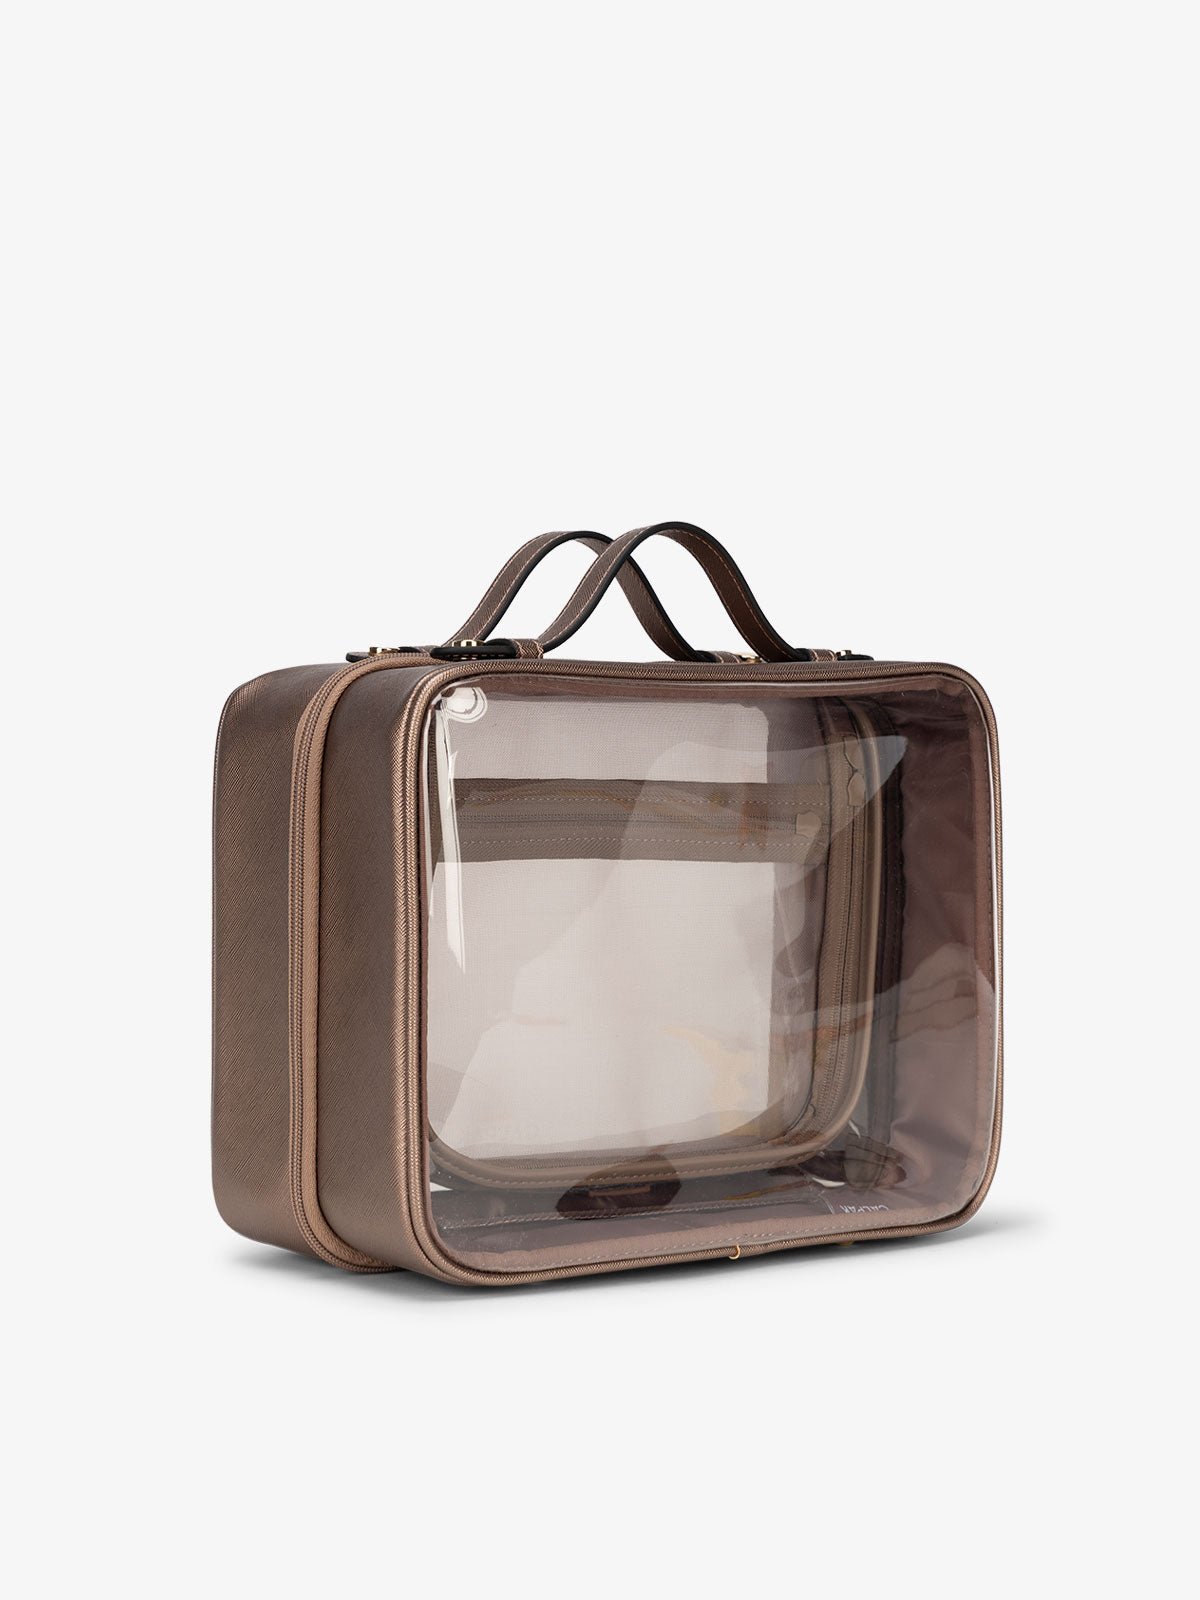 CALPAK large clear skincare bag with multiple zippered compartments in metallic bronze